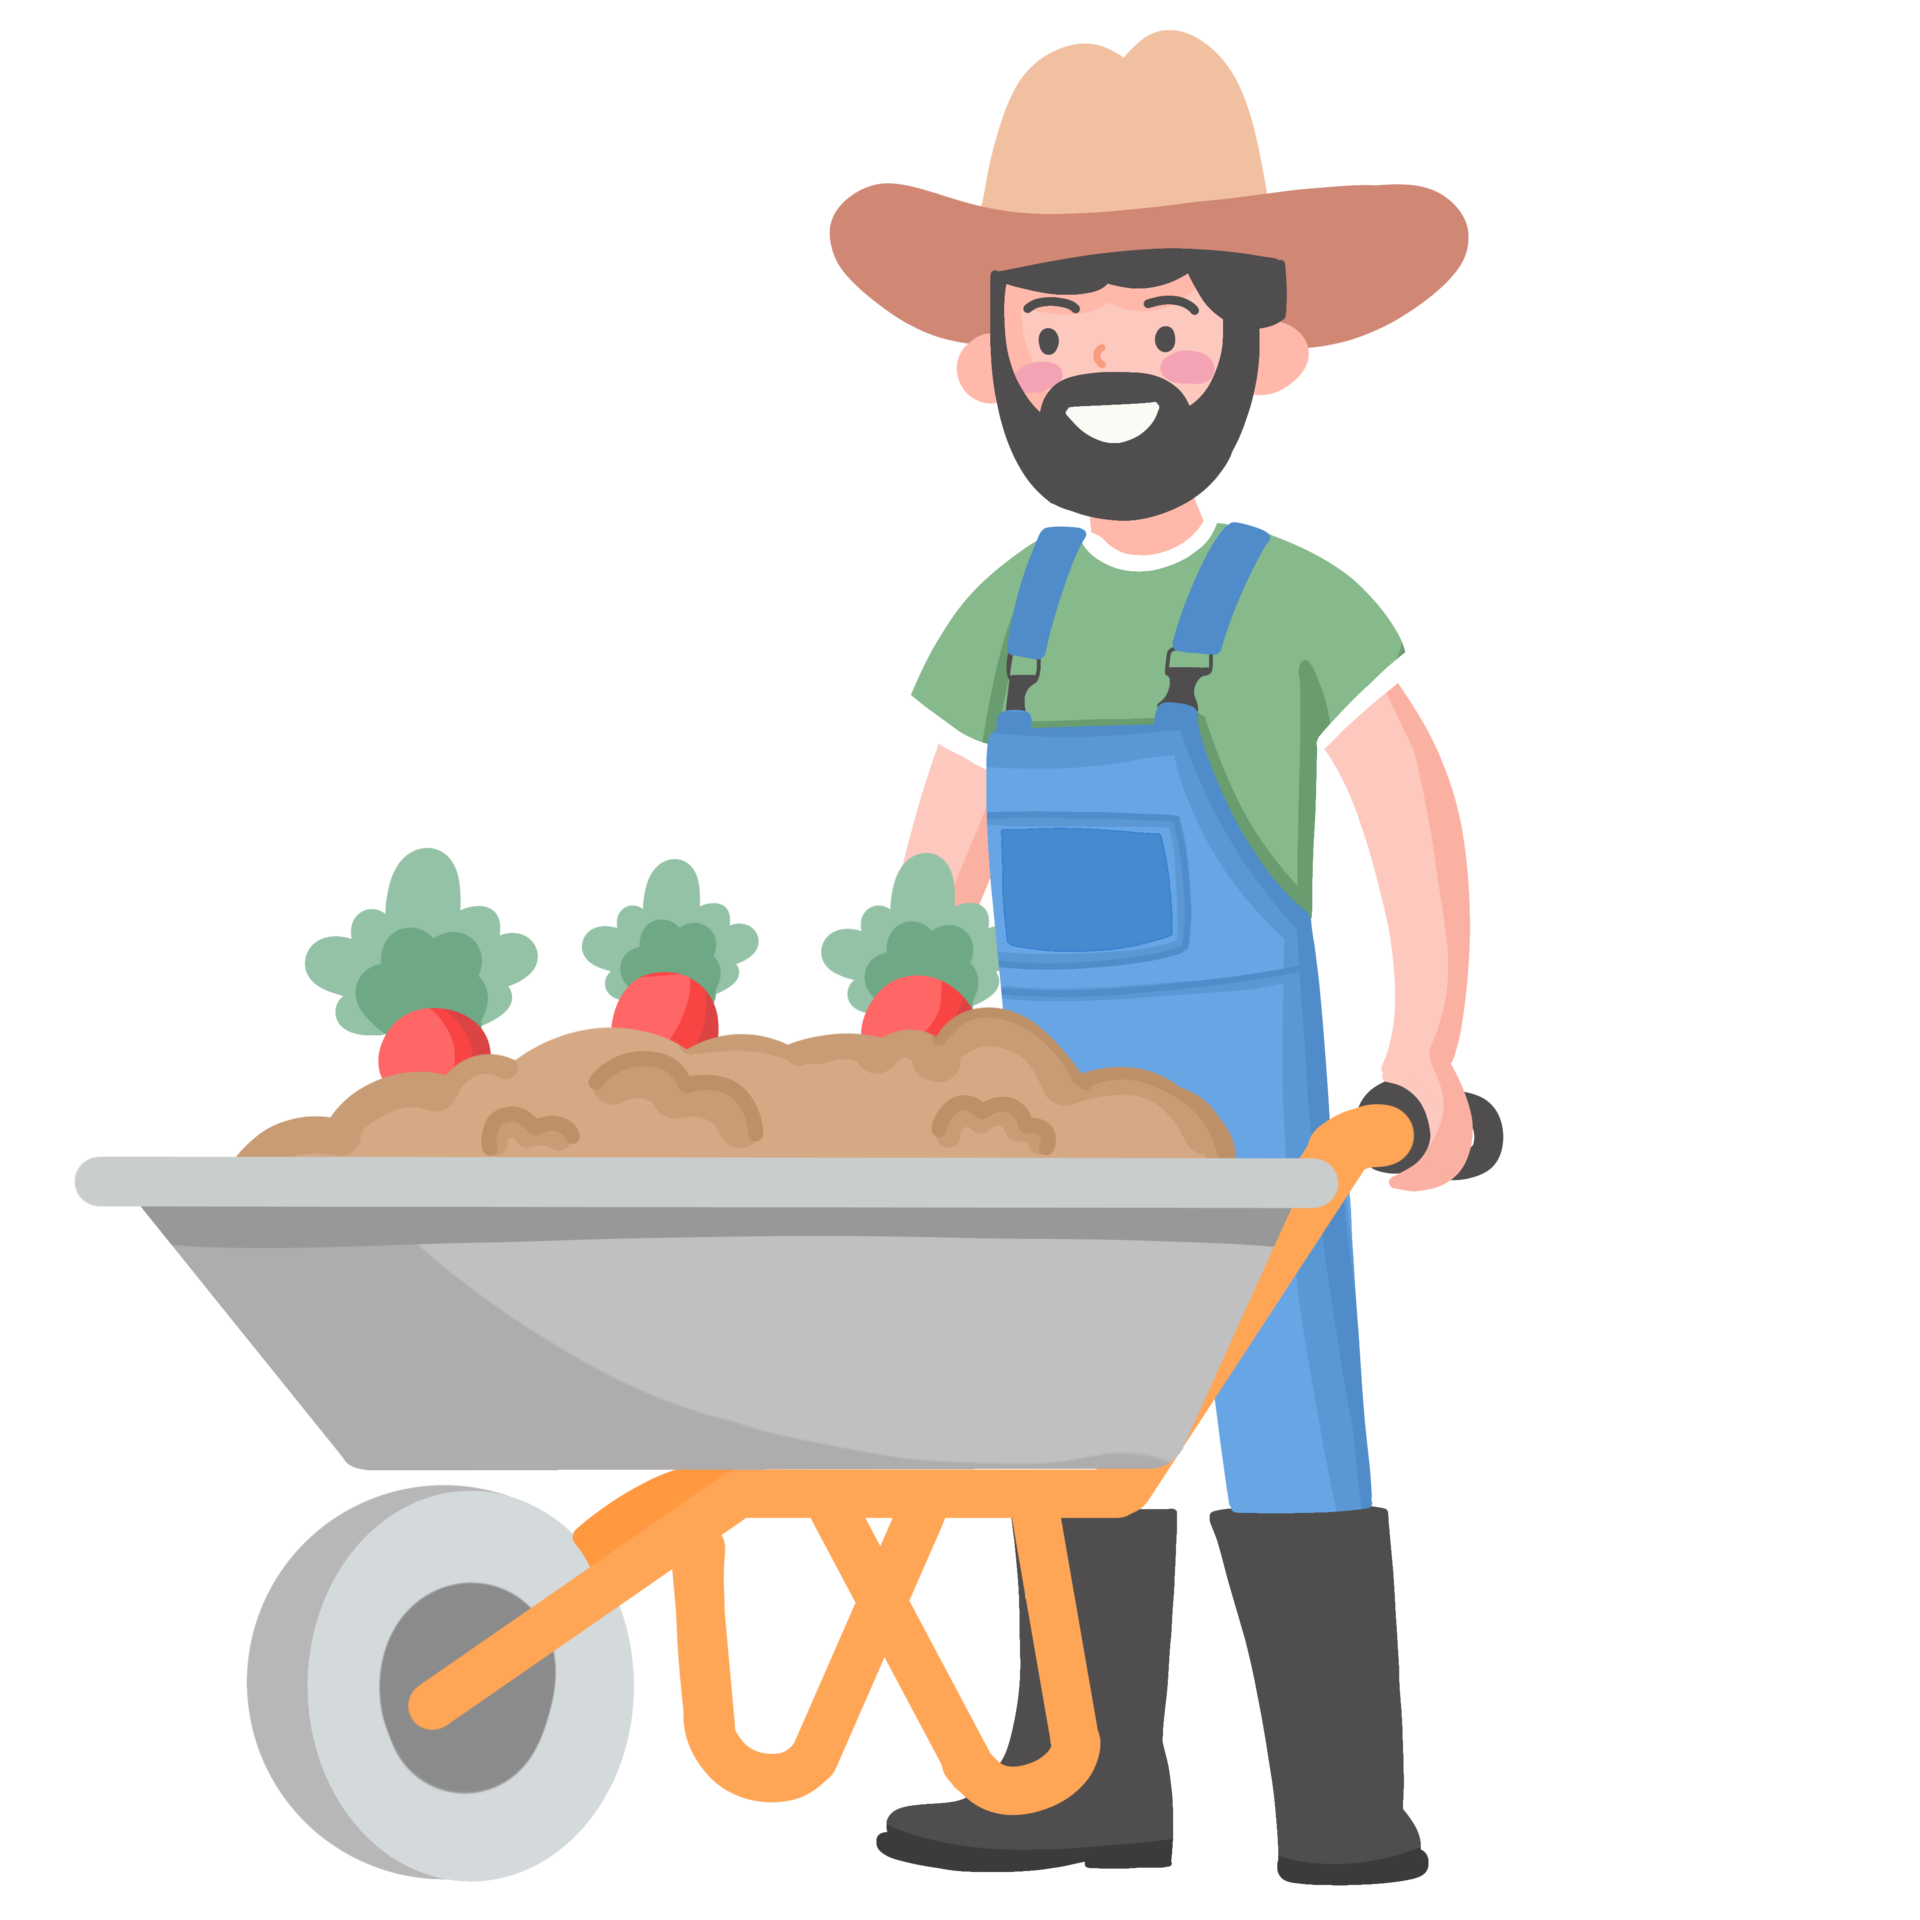 Farmer PNG Free Images with Transparent Background - (940 Free Downloads)